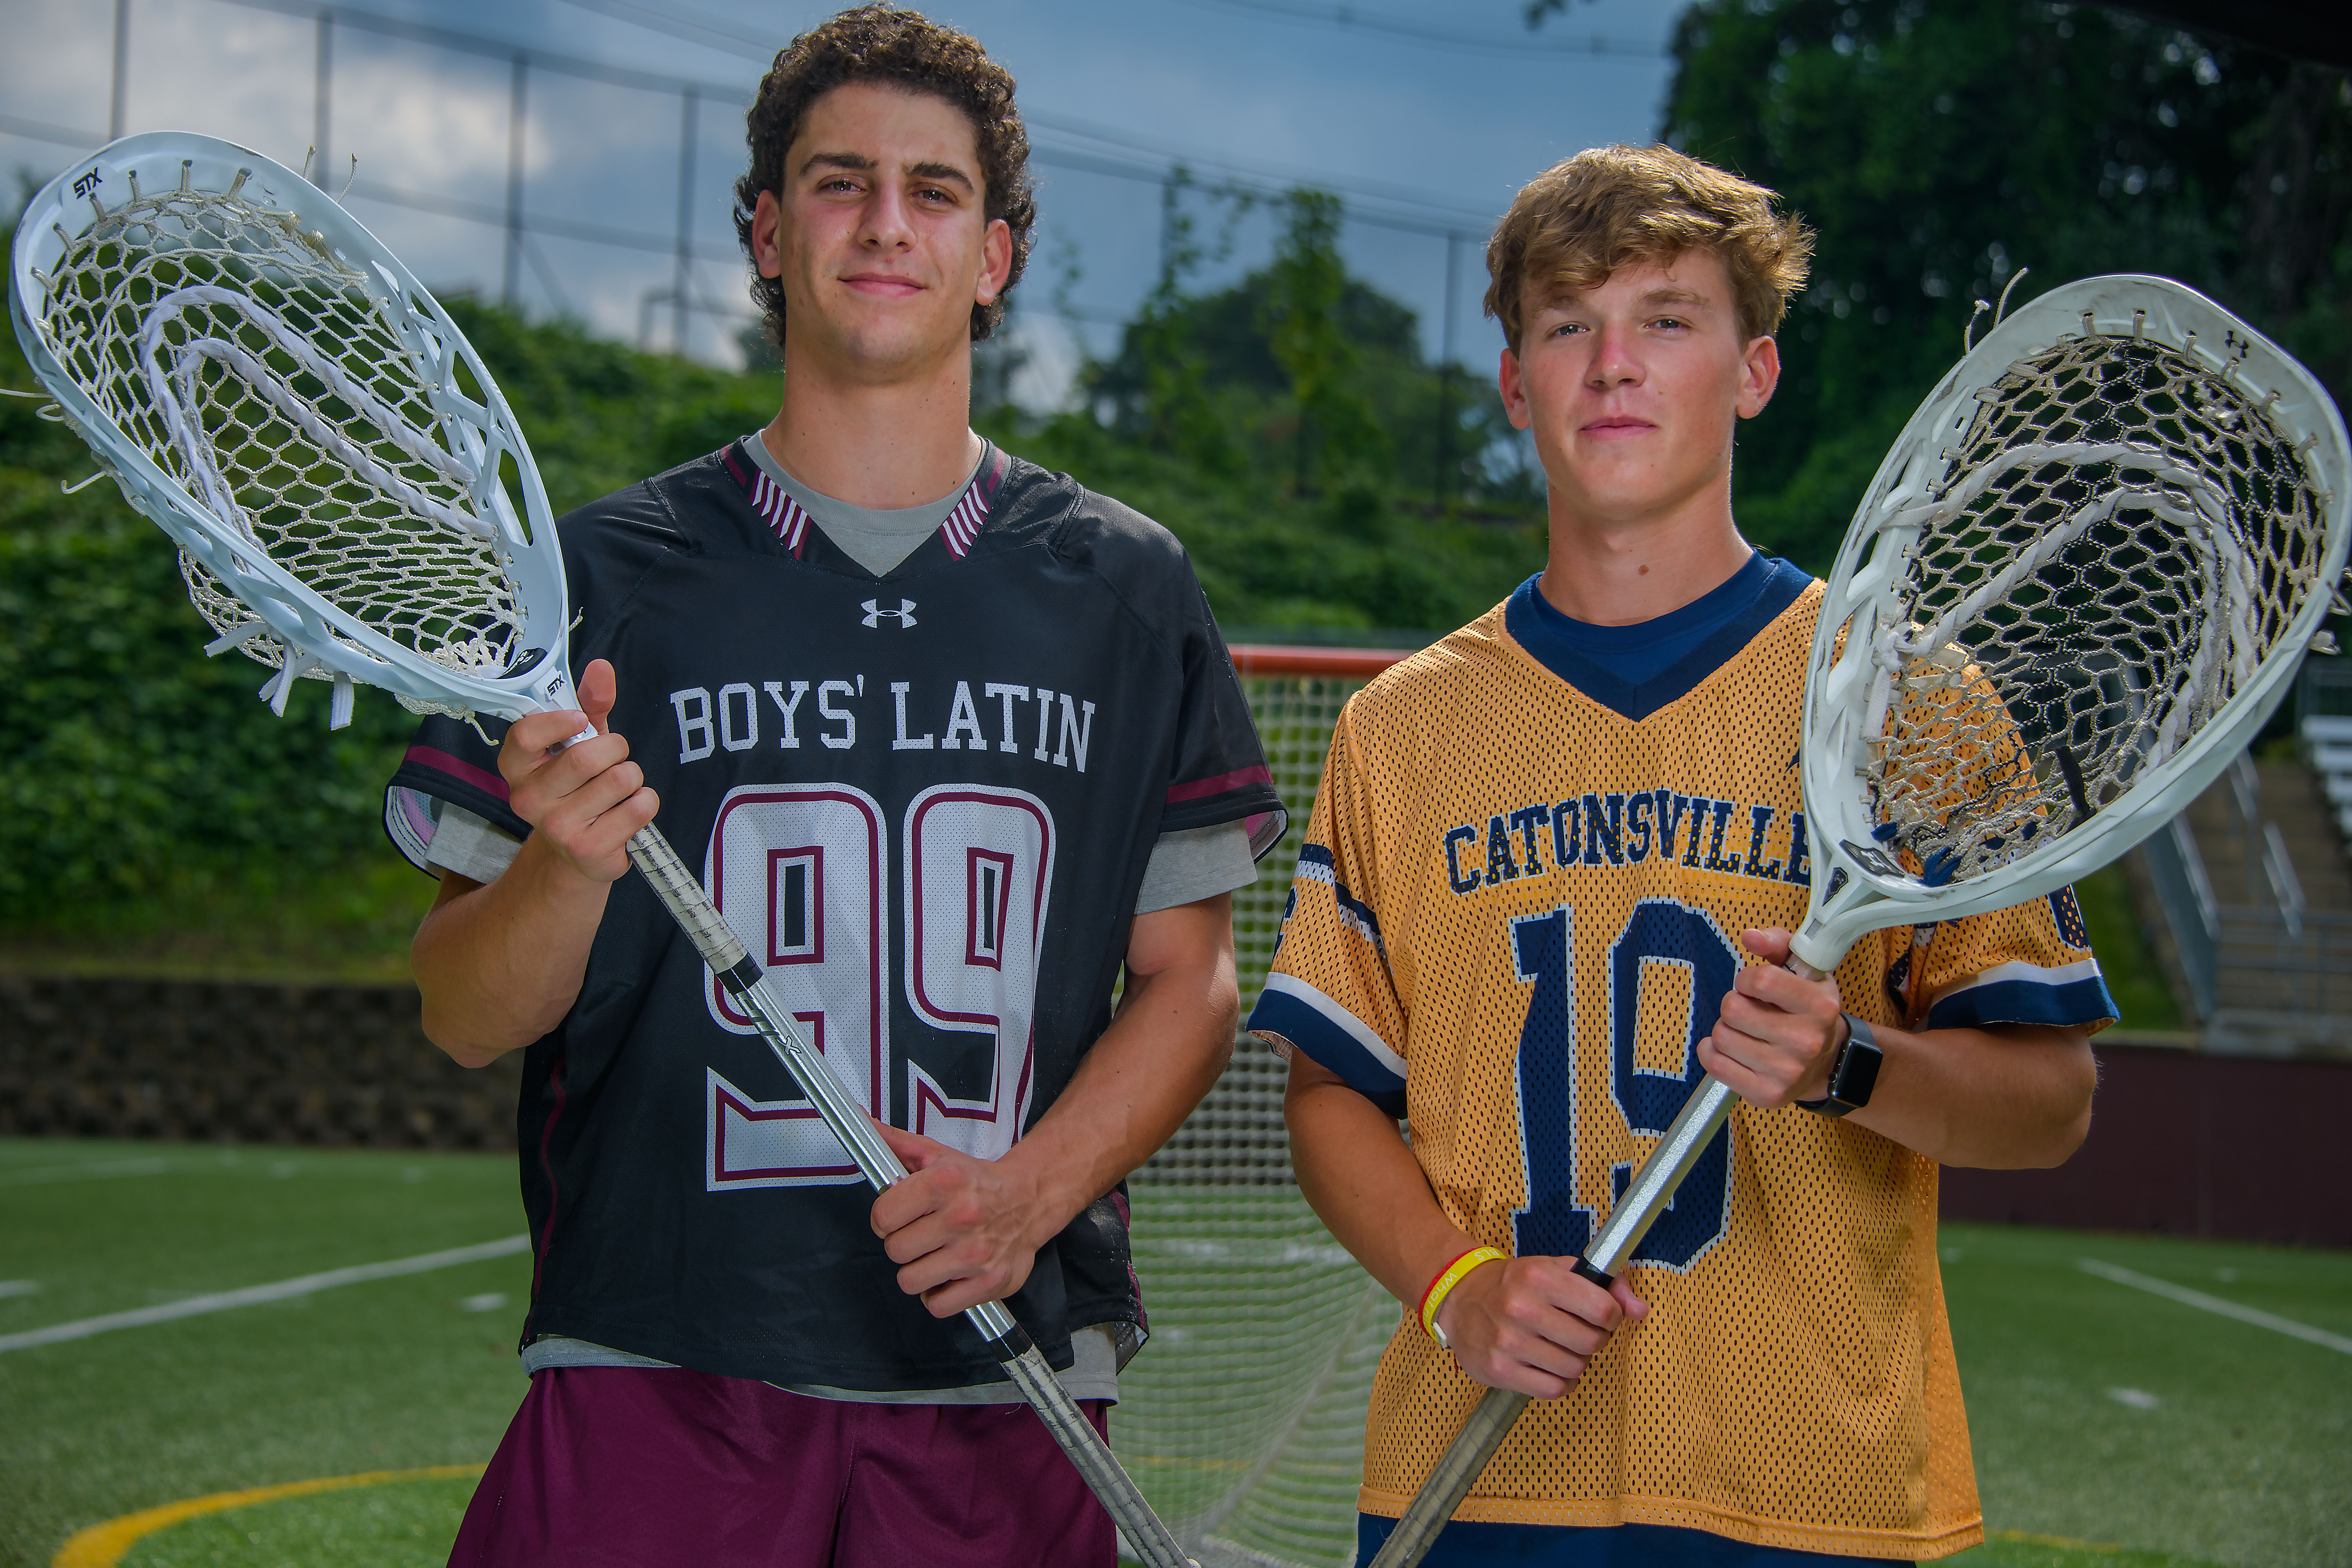 At the Armour All-America Lacrosse Game, goals are bountiful. Catonsville's Brian and Boys' Latin's Cardin Stoller try to stop them.